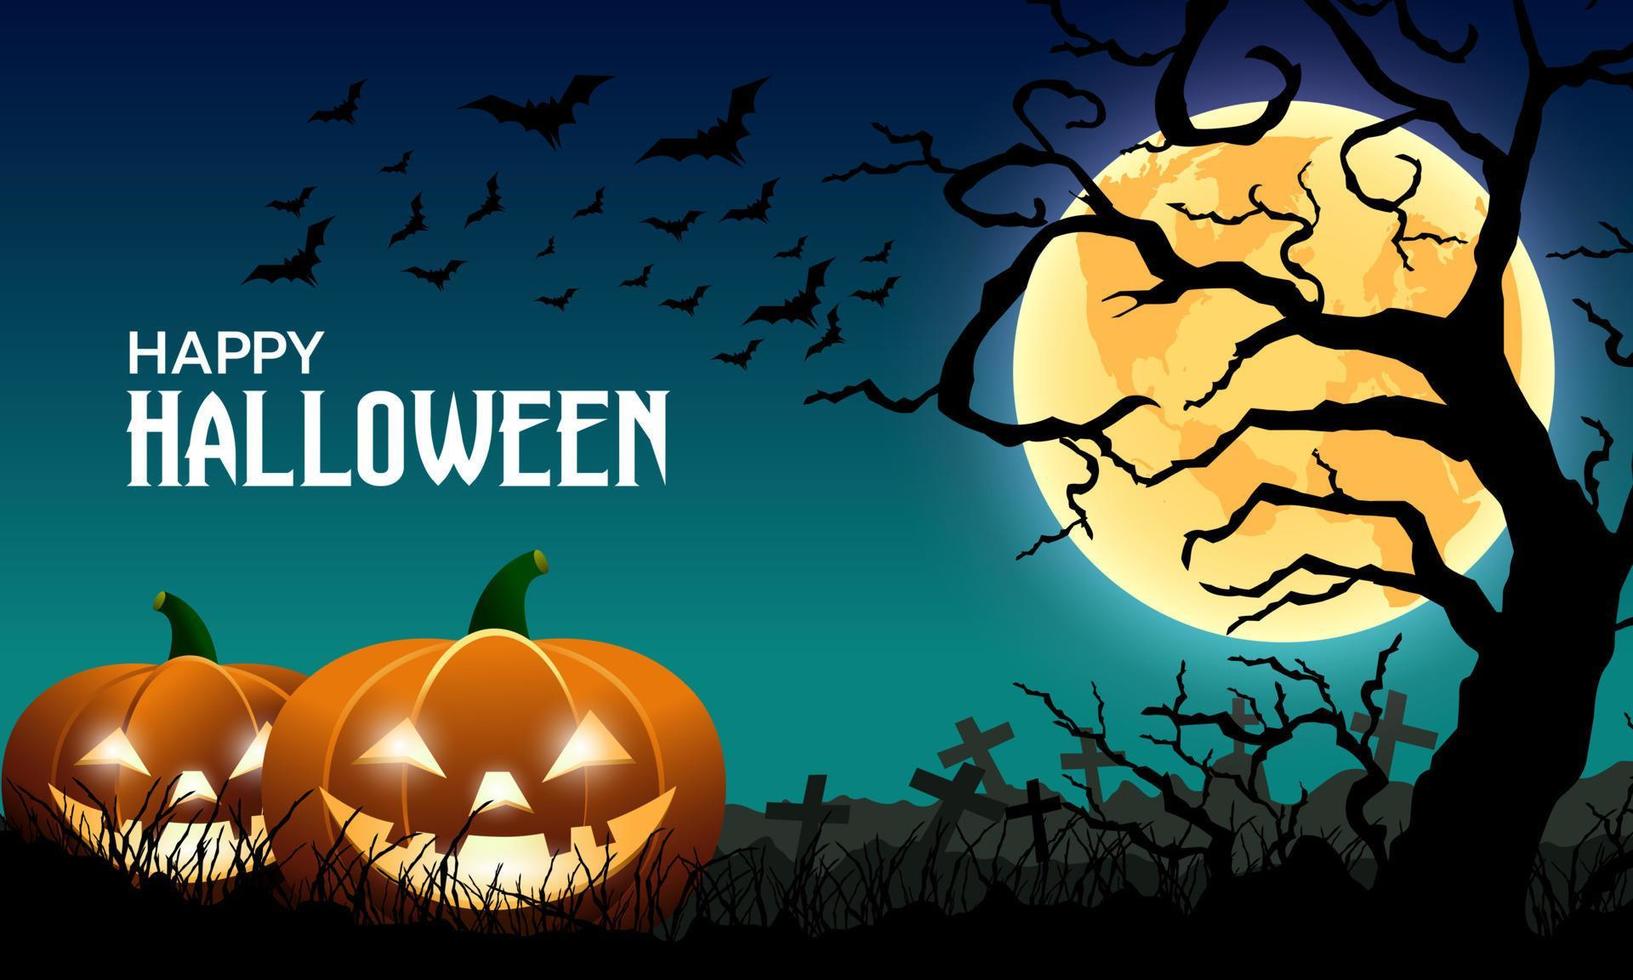 Happy halloween dark night background full moon with pumpkin, cemetery, trees and flying bats.vector illustration. vector